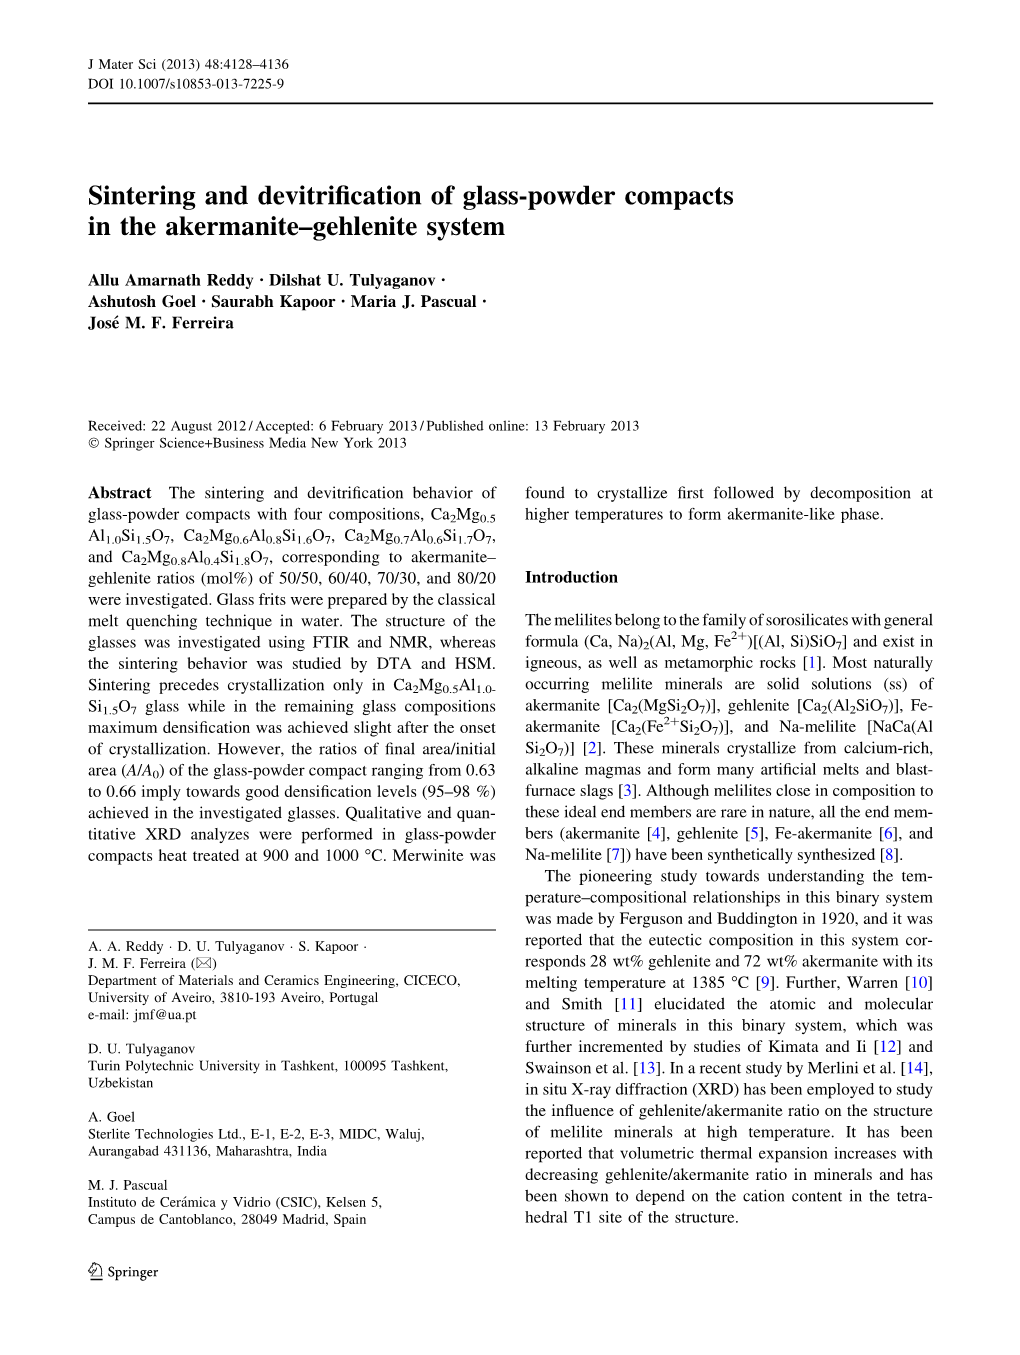 Sintering and Devitrification of Glass-Powder Compacts in the Akermanite–Gehlenite System